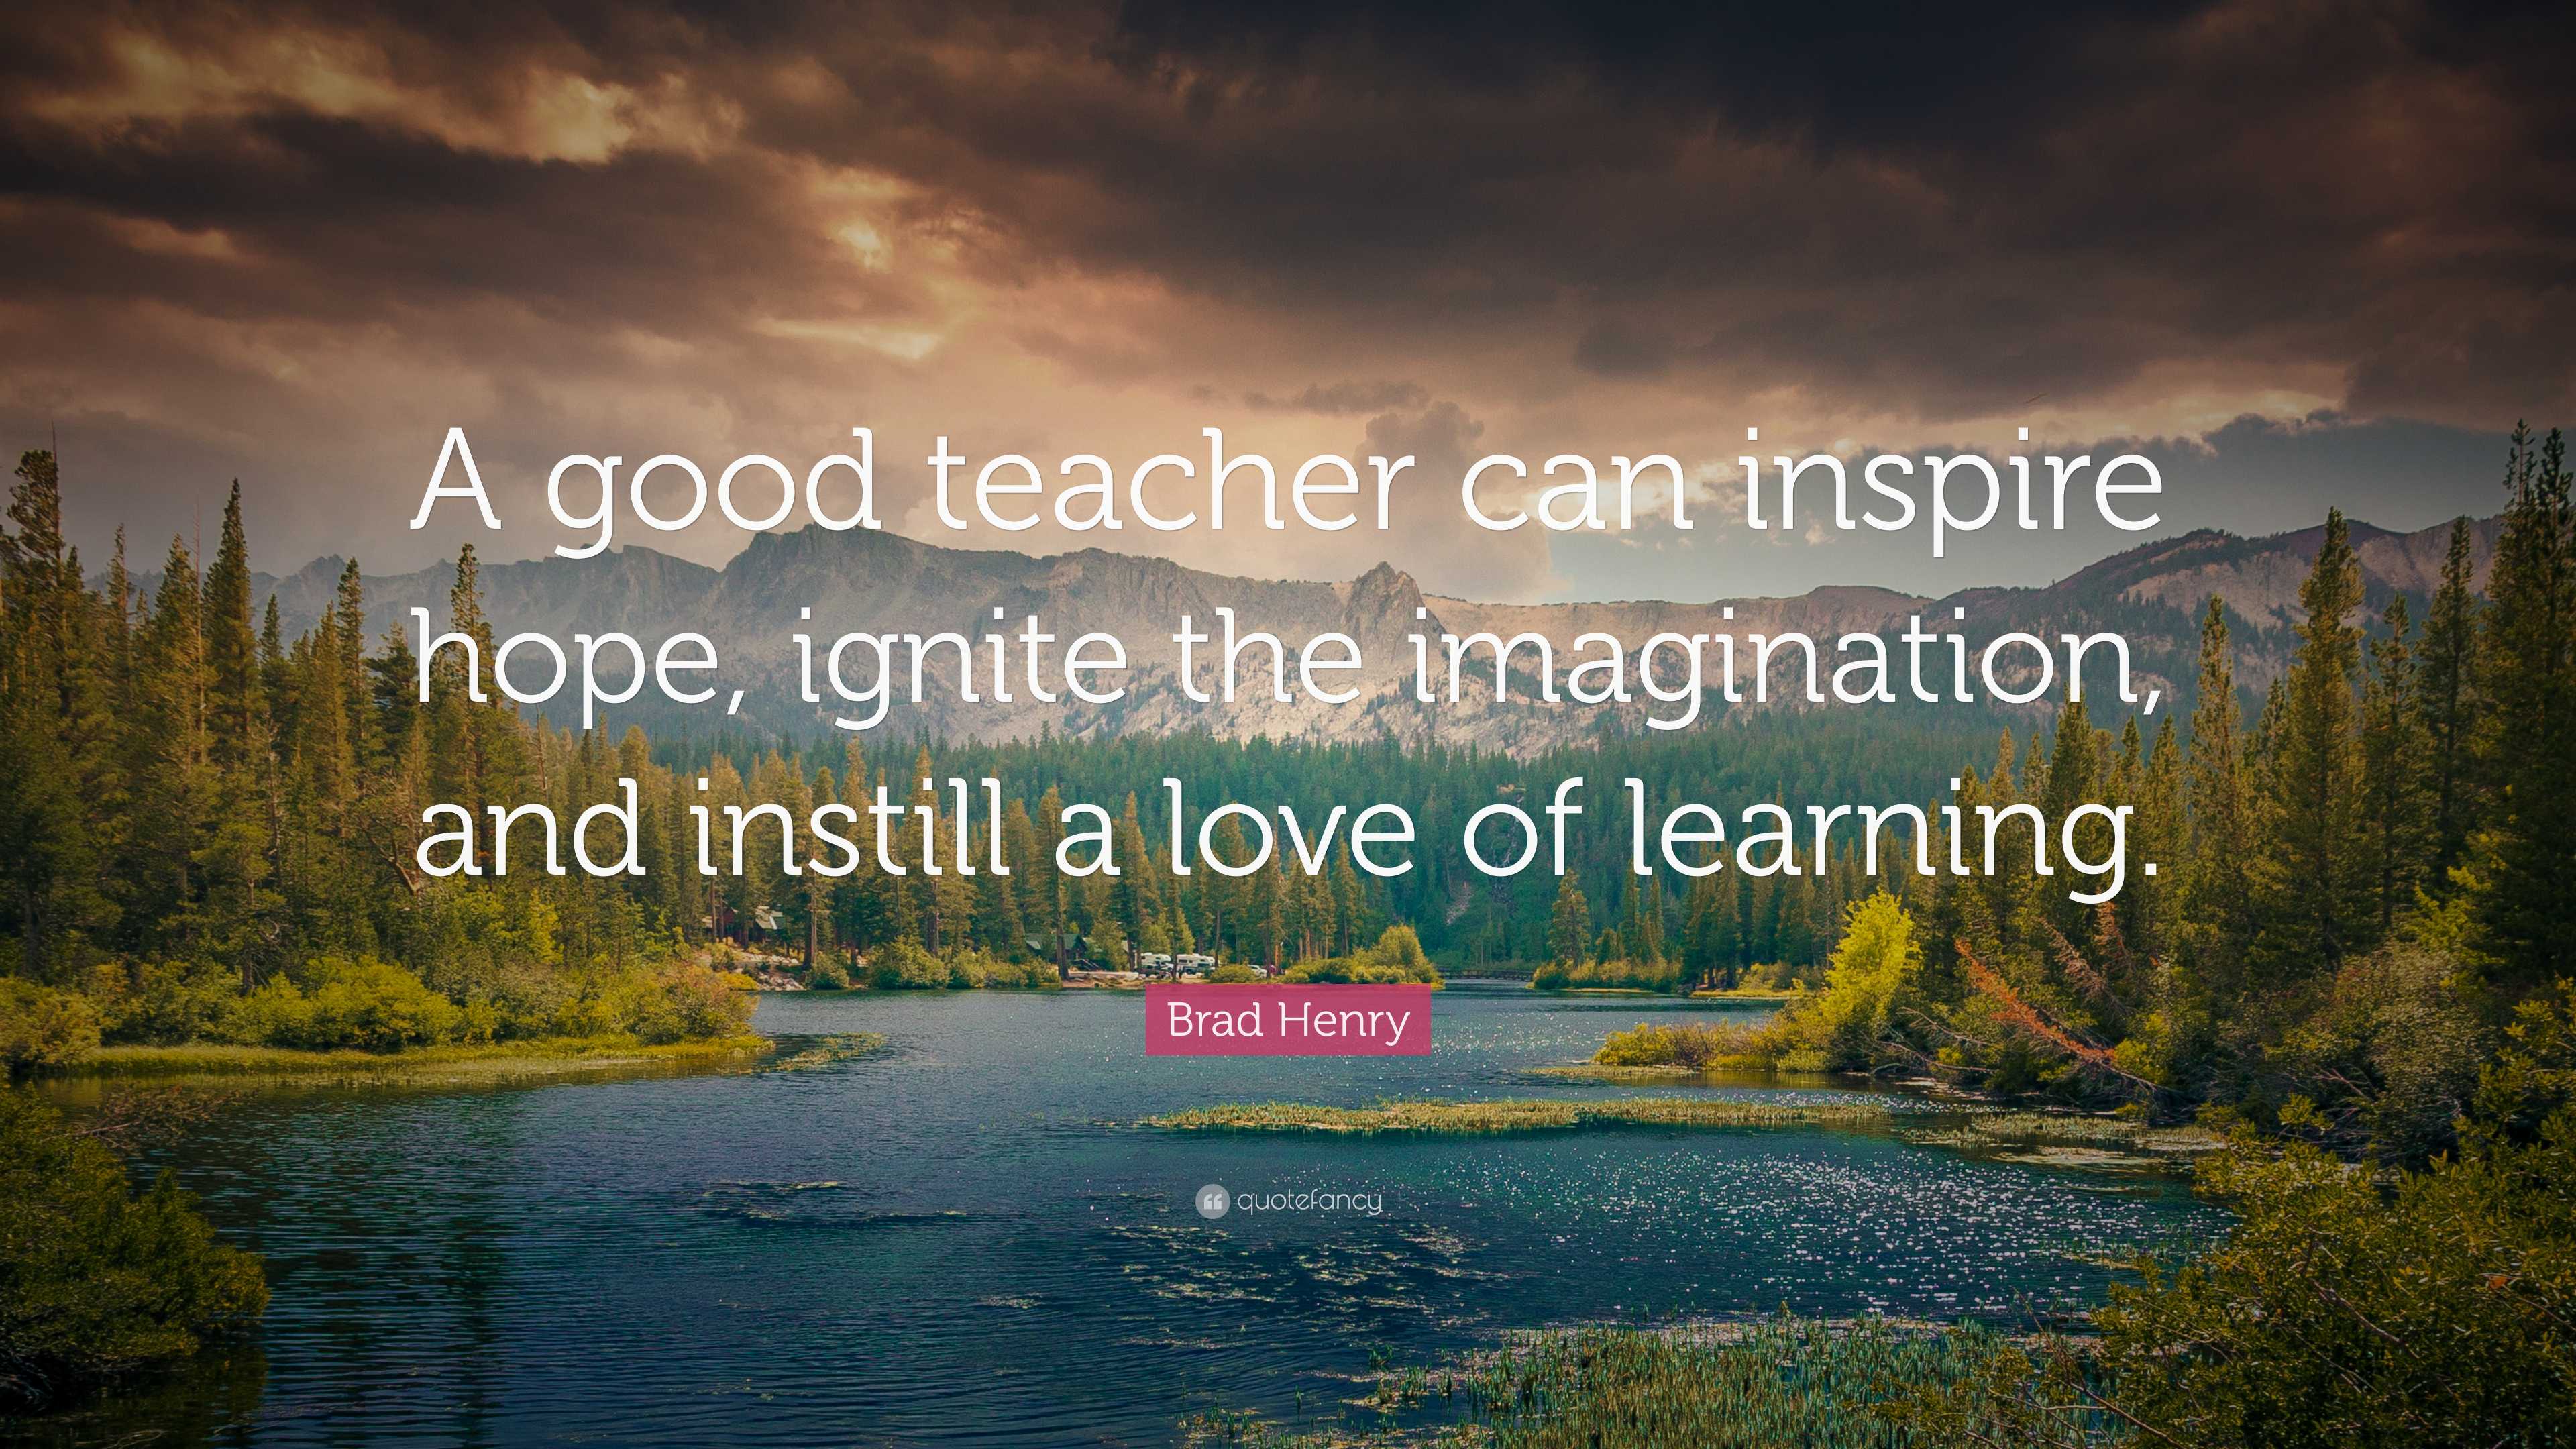 Brad Henry Quote: “A good teacher can inspire hope, ignite the ...